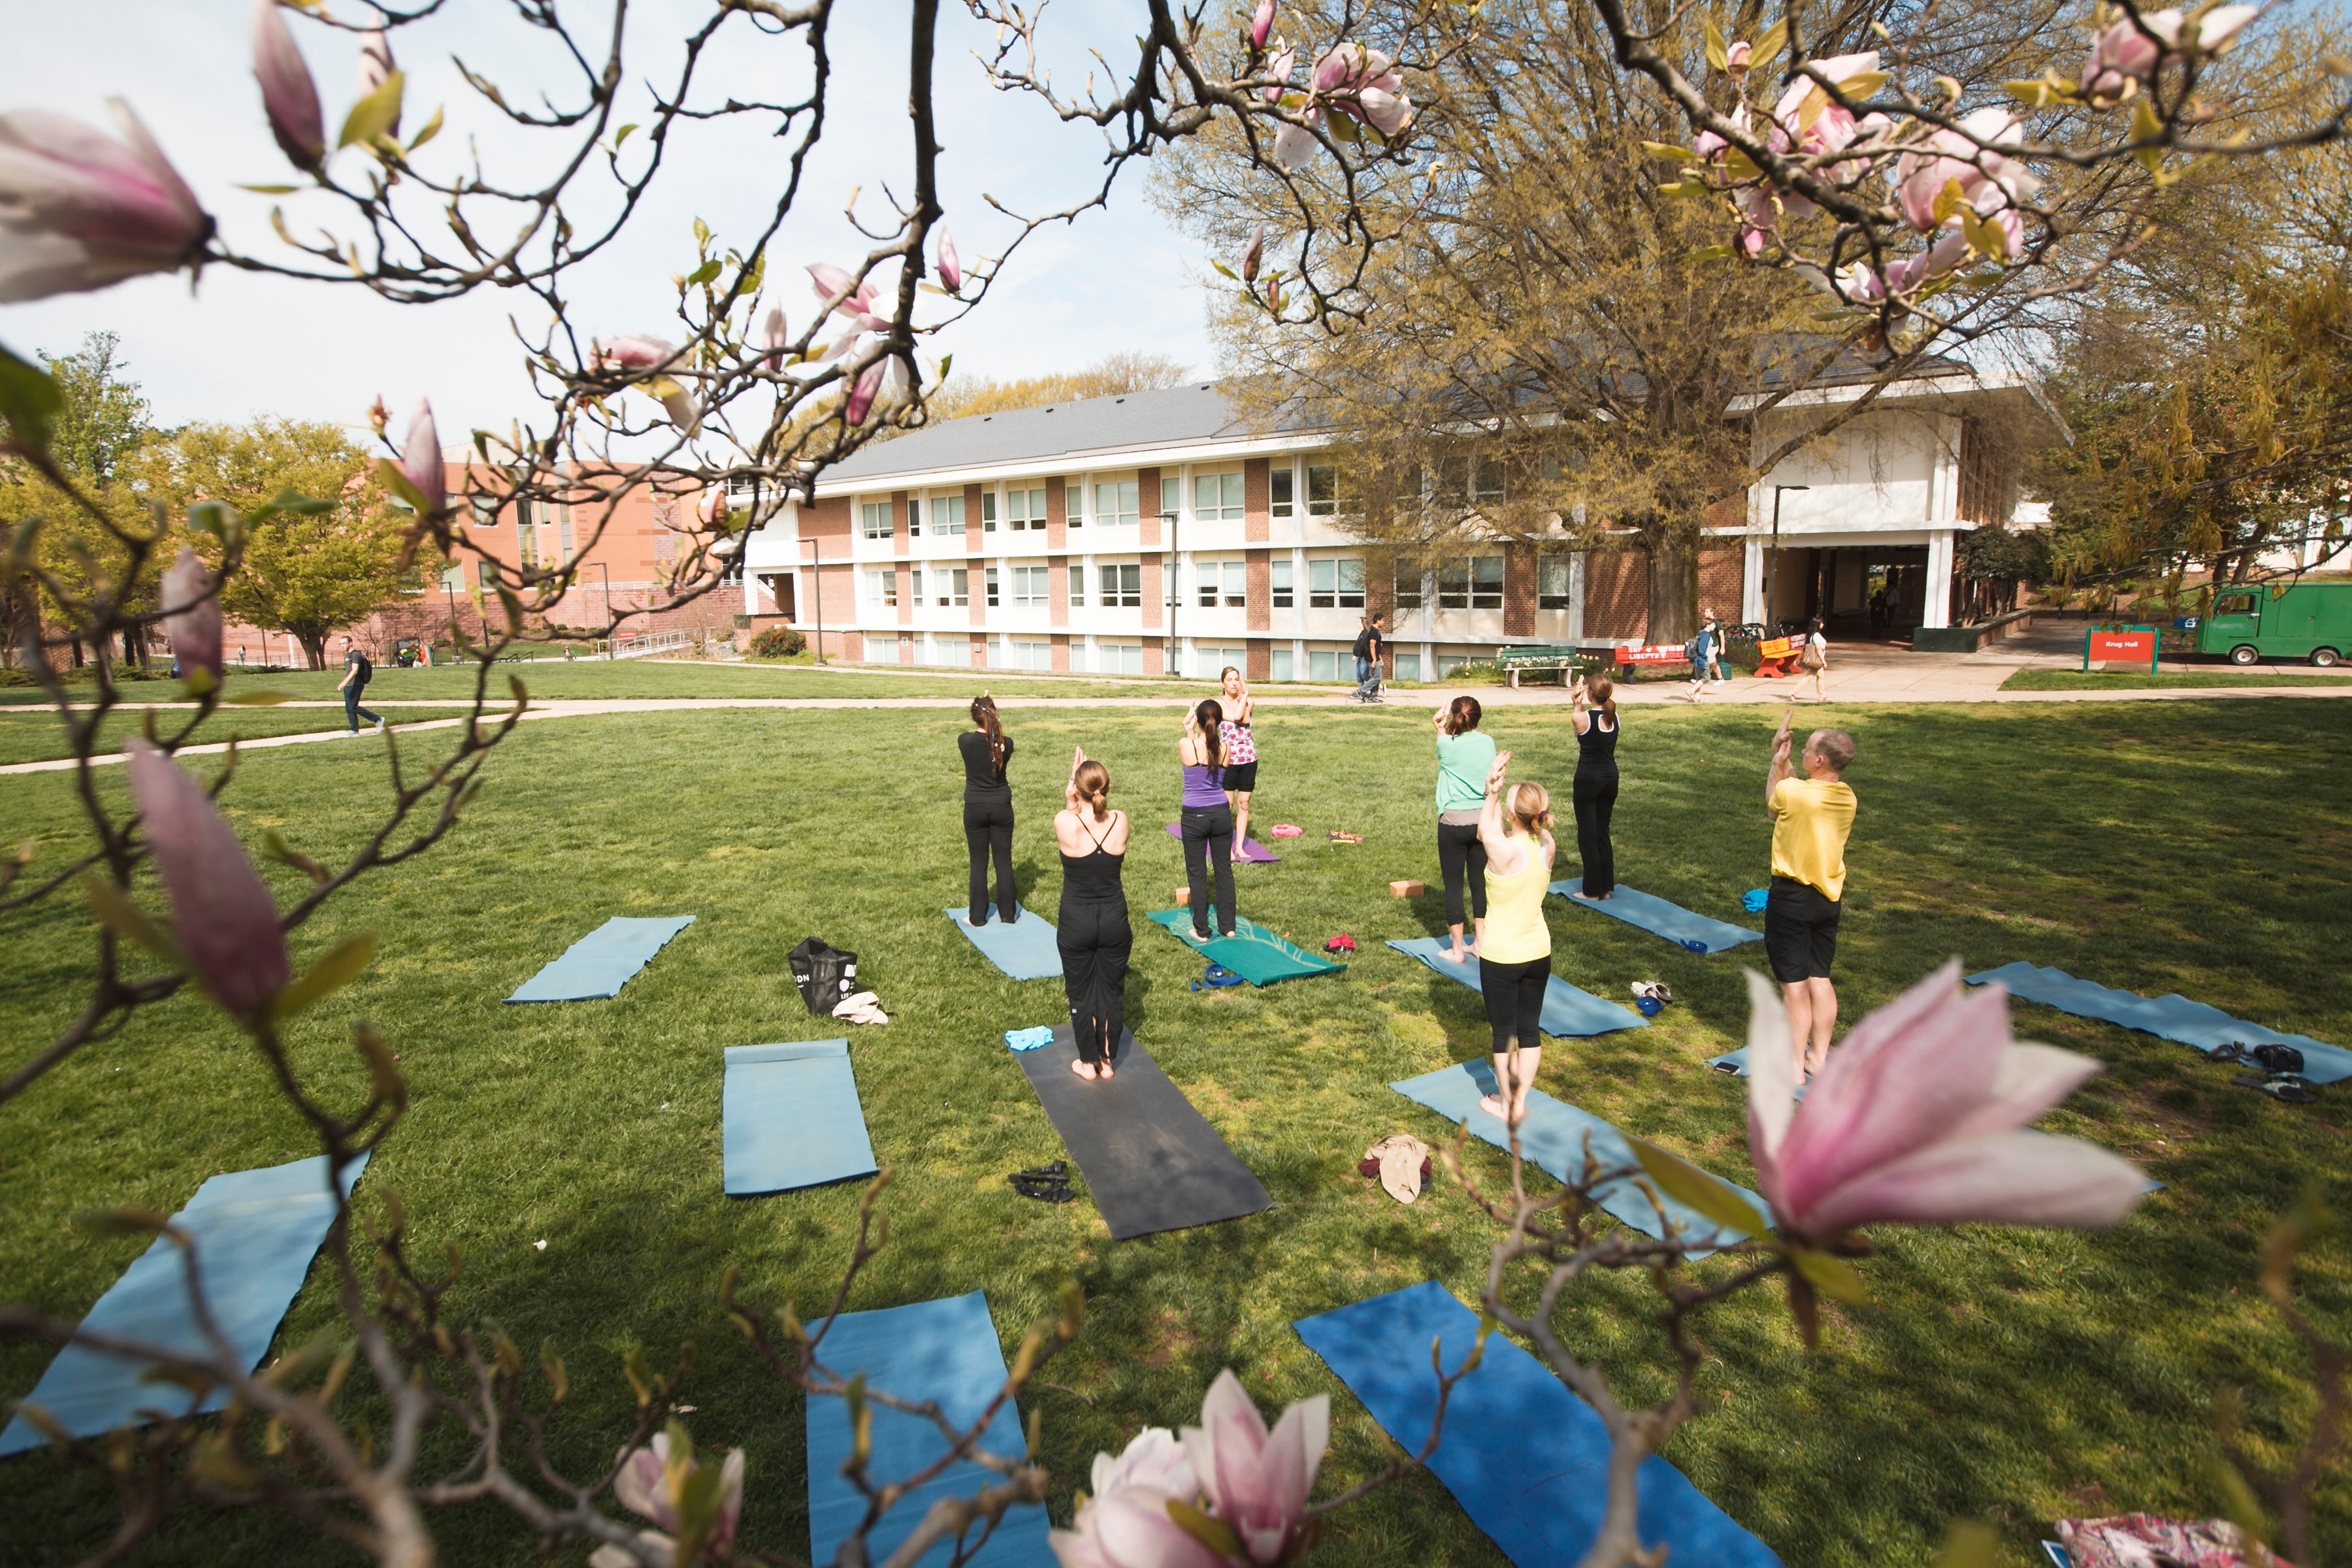 Students participate in outdoor Yoga. Photo by Will Martinez/Creative Services/George Mason University.